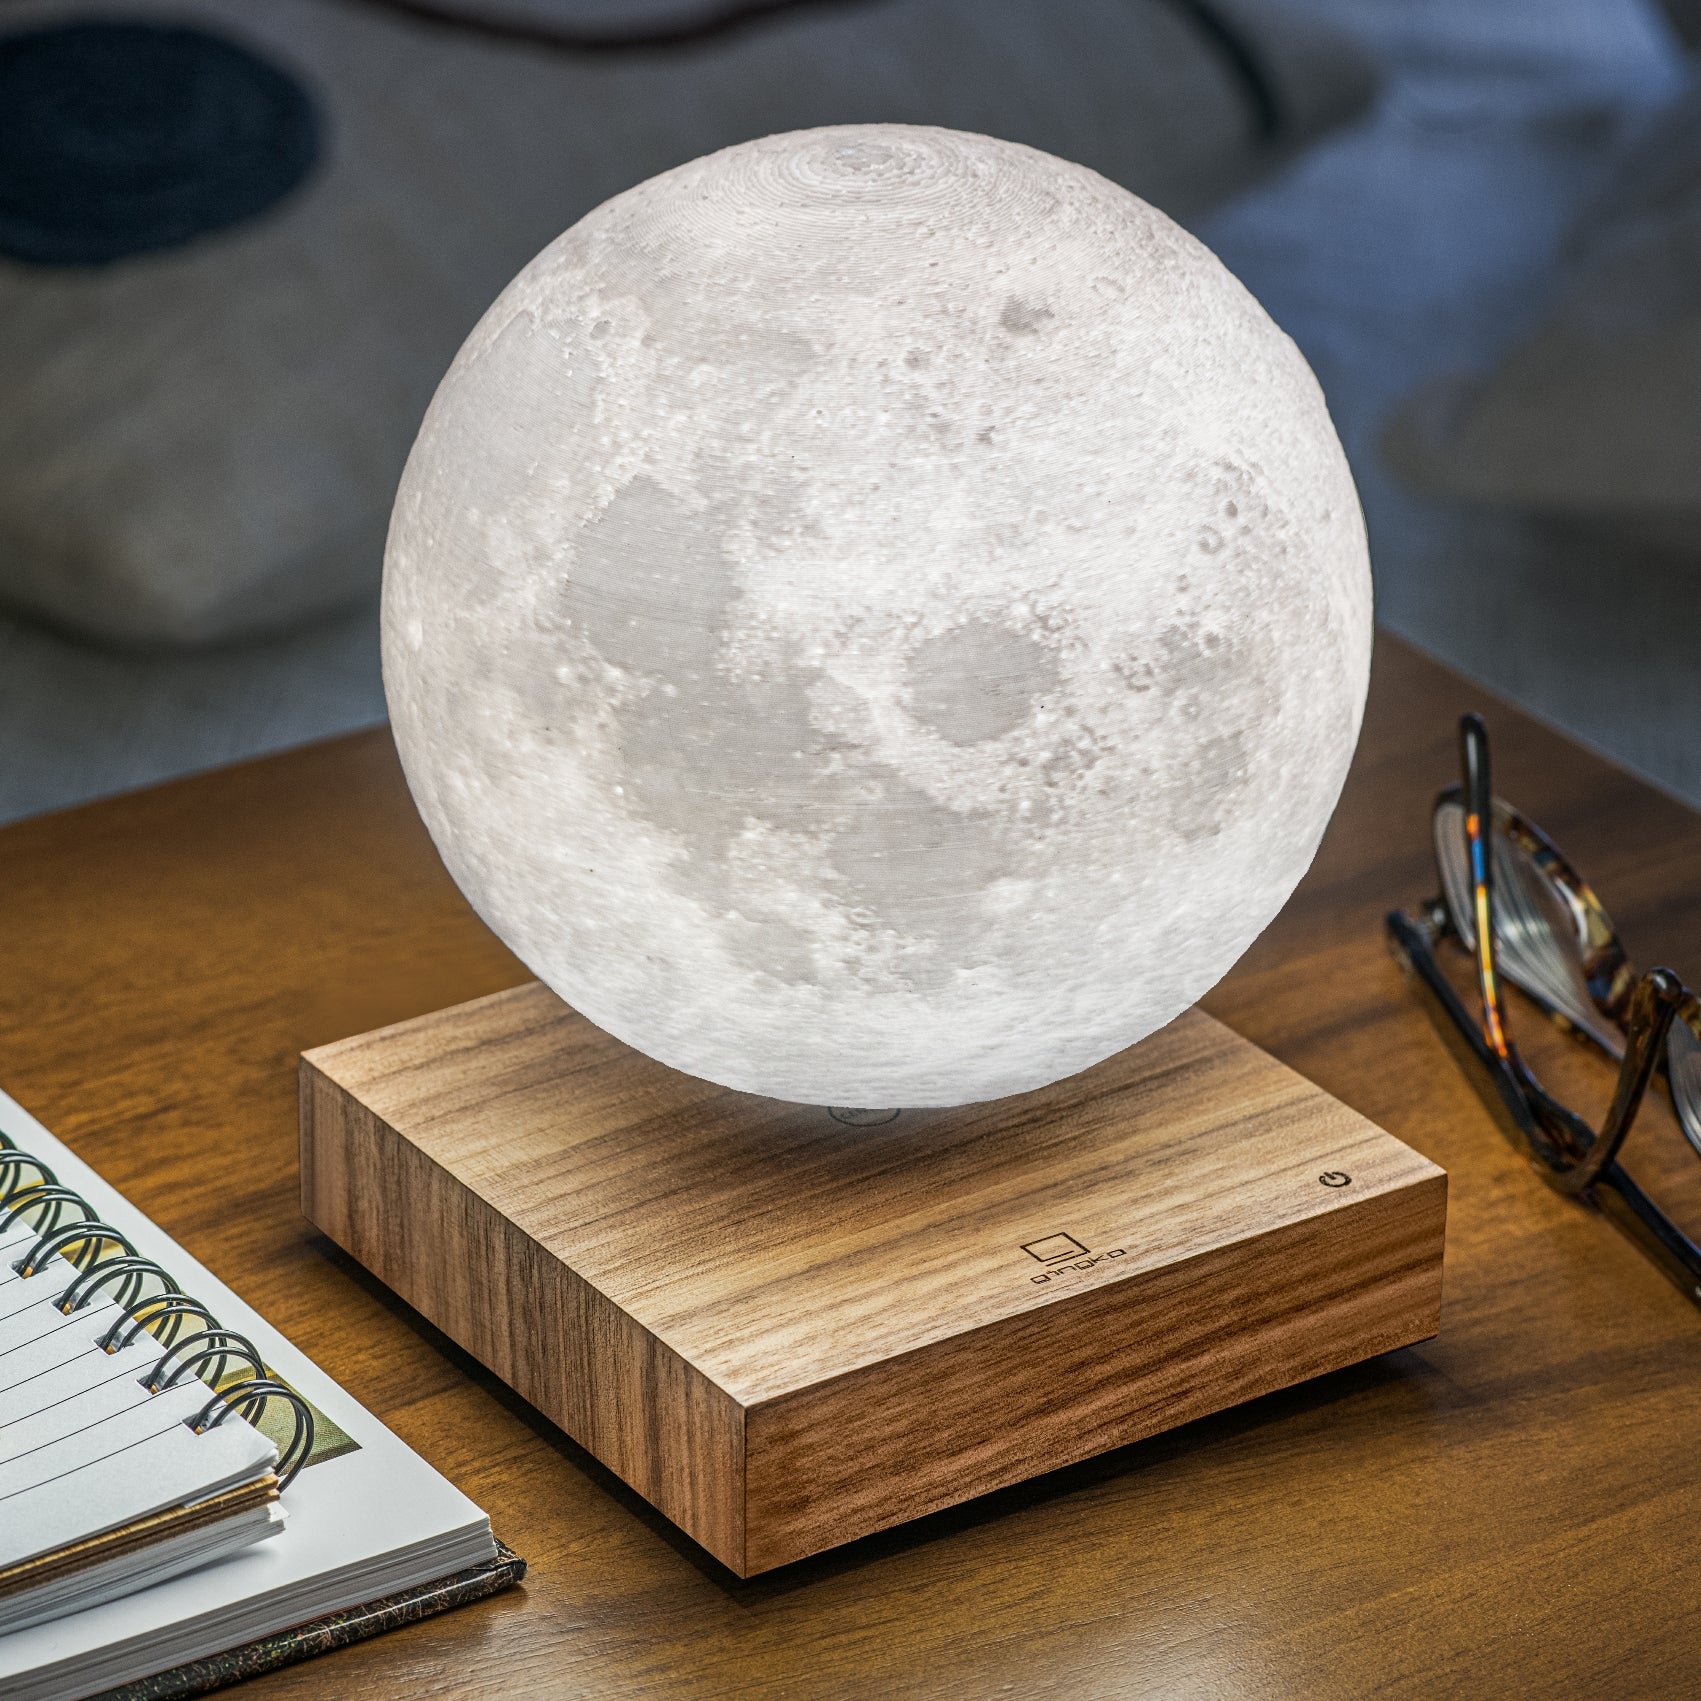 Smart Moon Lamp on desk next to a pair of glasses